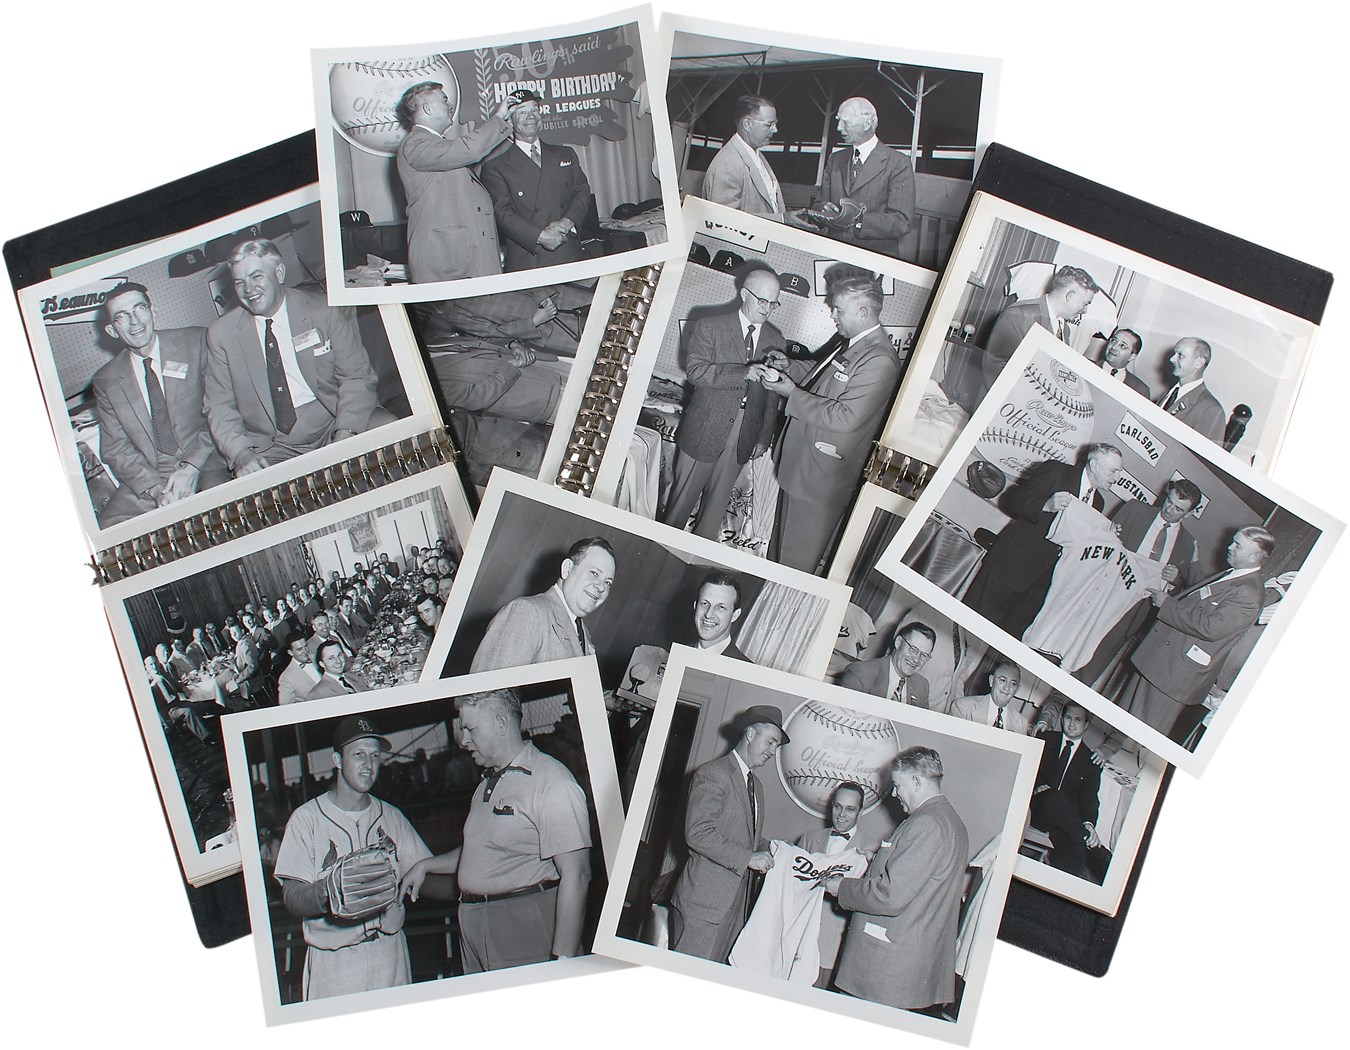 - 1951 Rawlings Golden Jubilee Promotional Photo Binders Featuring Players & "Trade Show Equipment Displays" (135 photos)